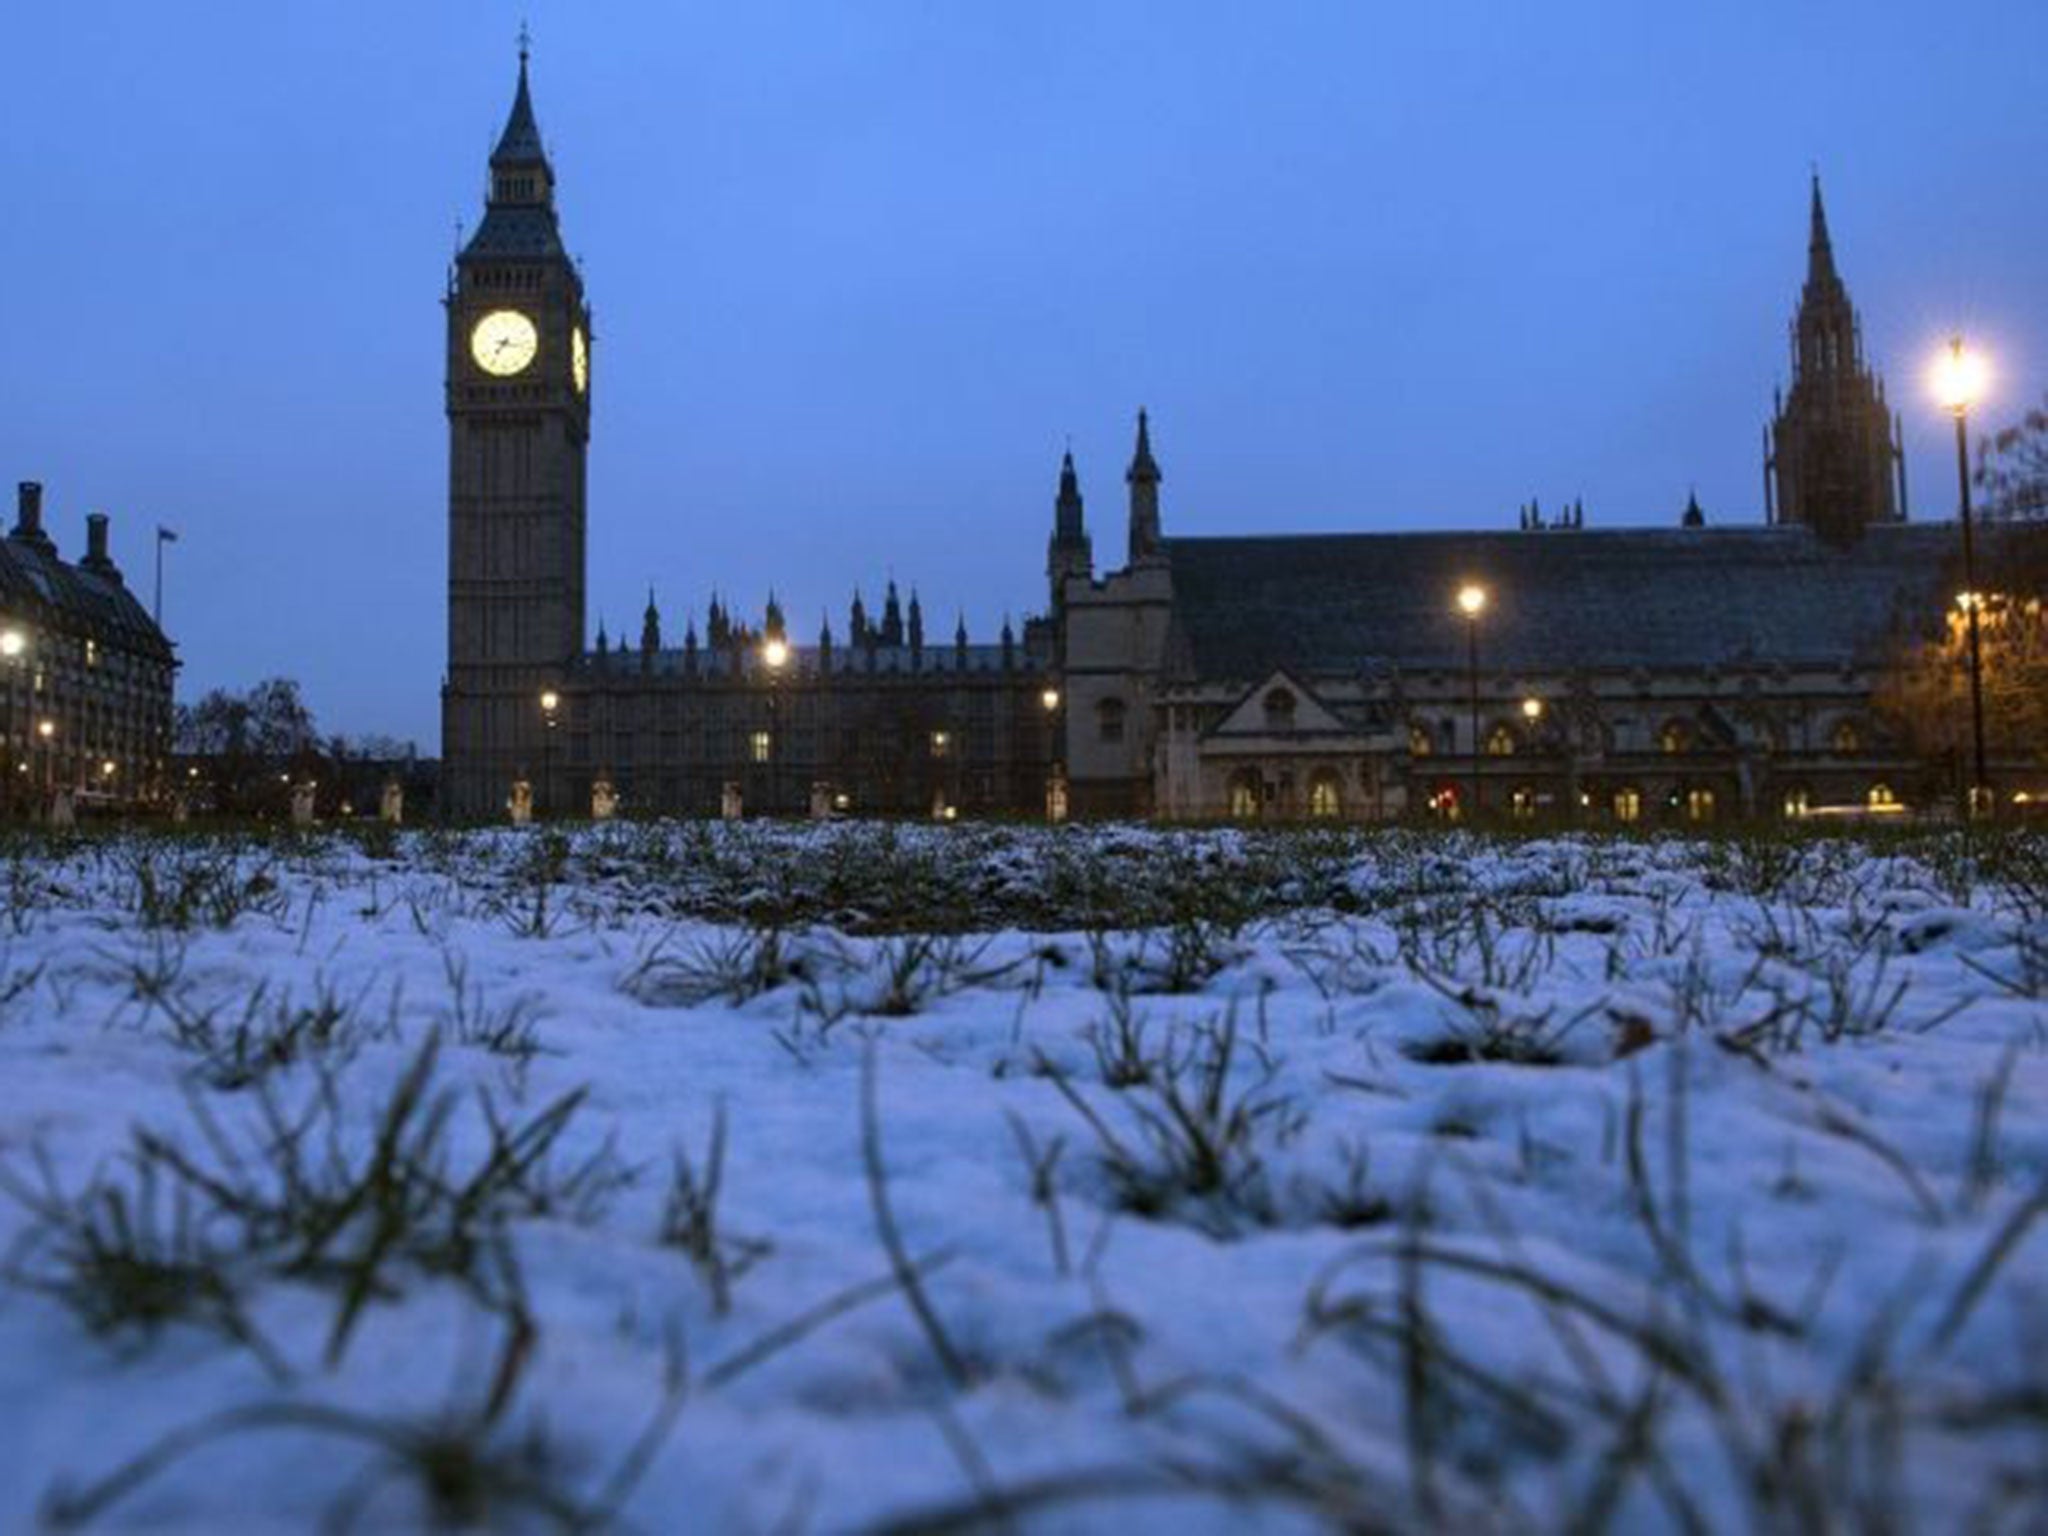 Light snow outside the Houses of Parliament, London, on 3 February